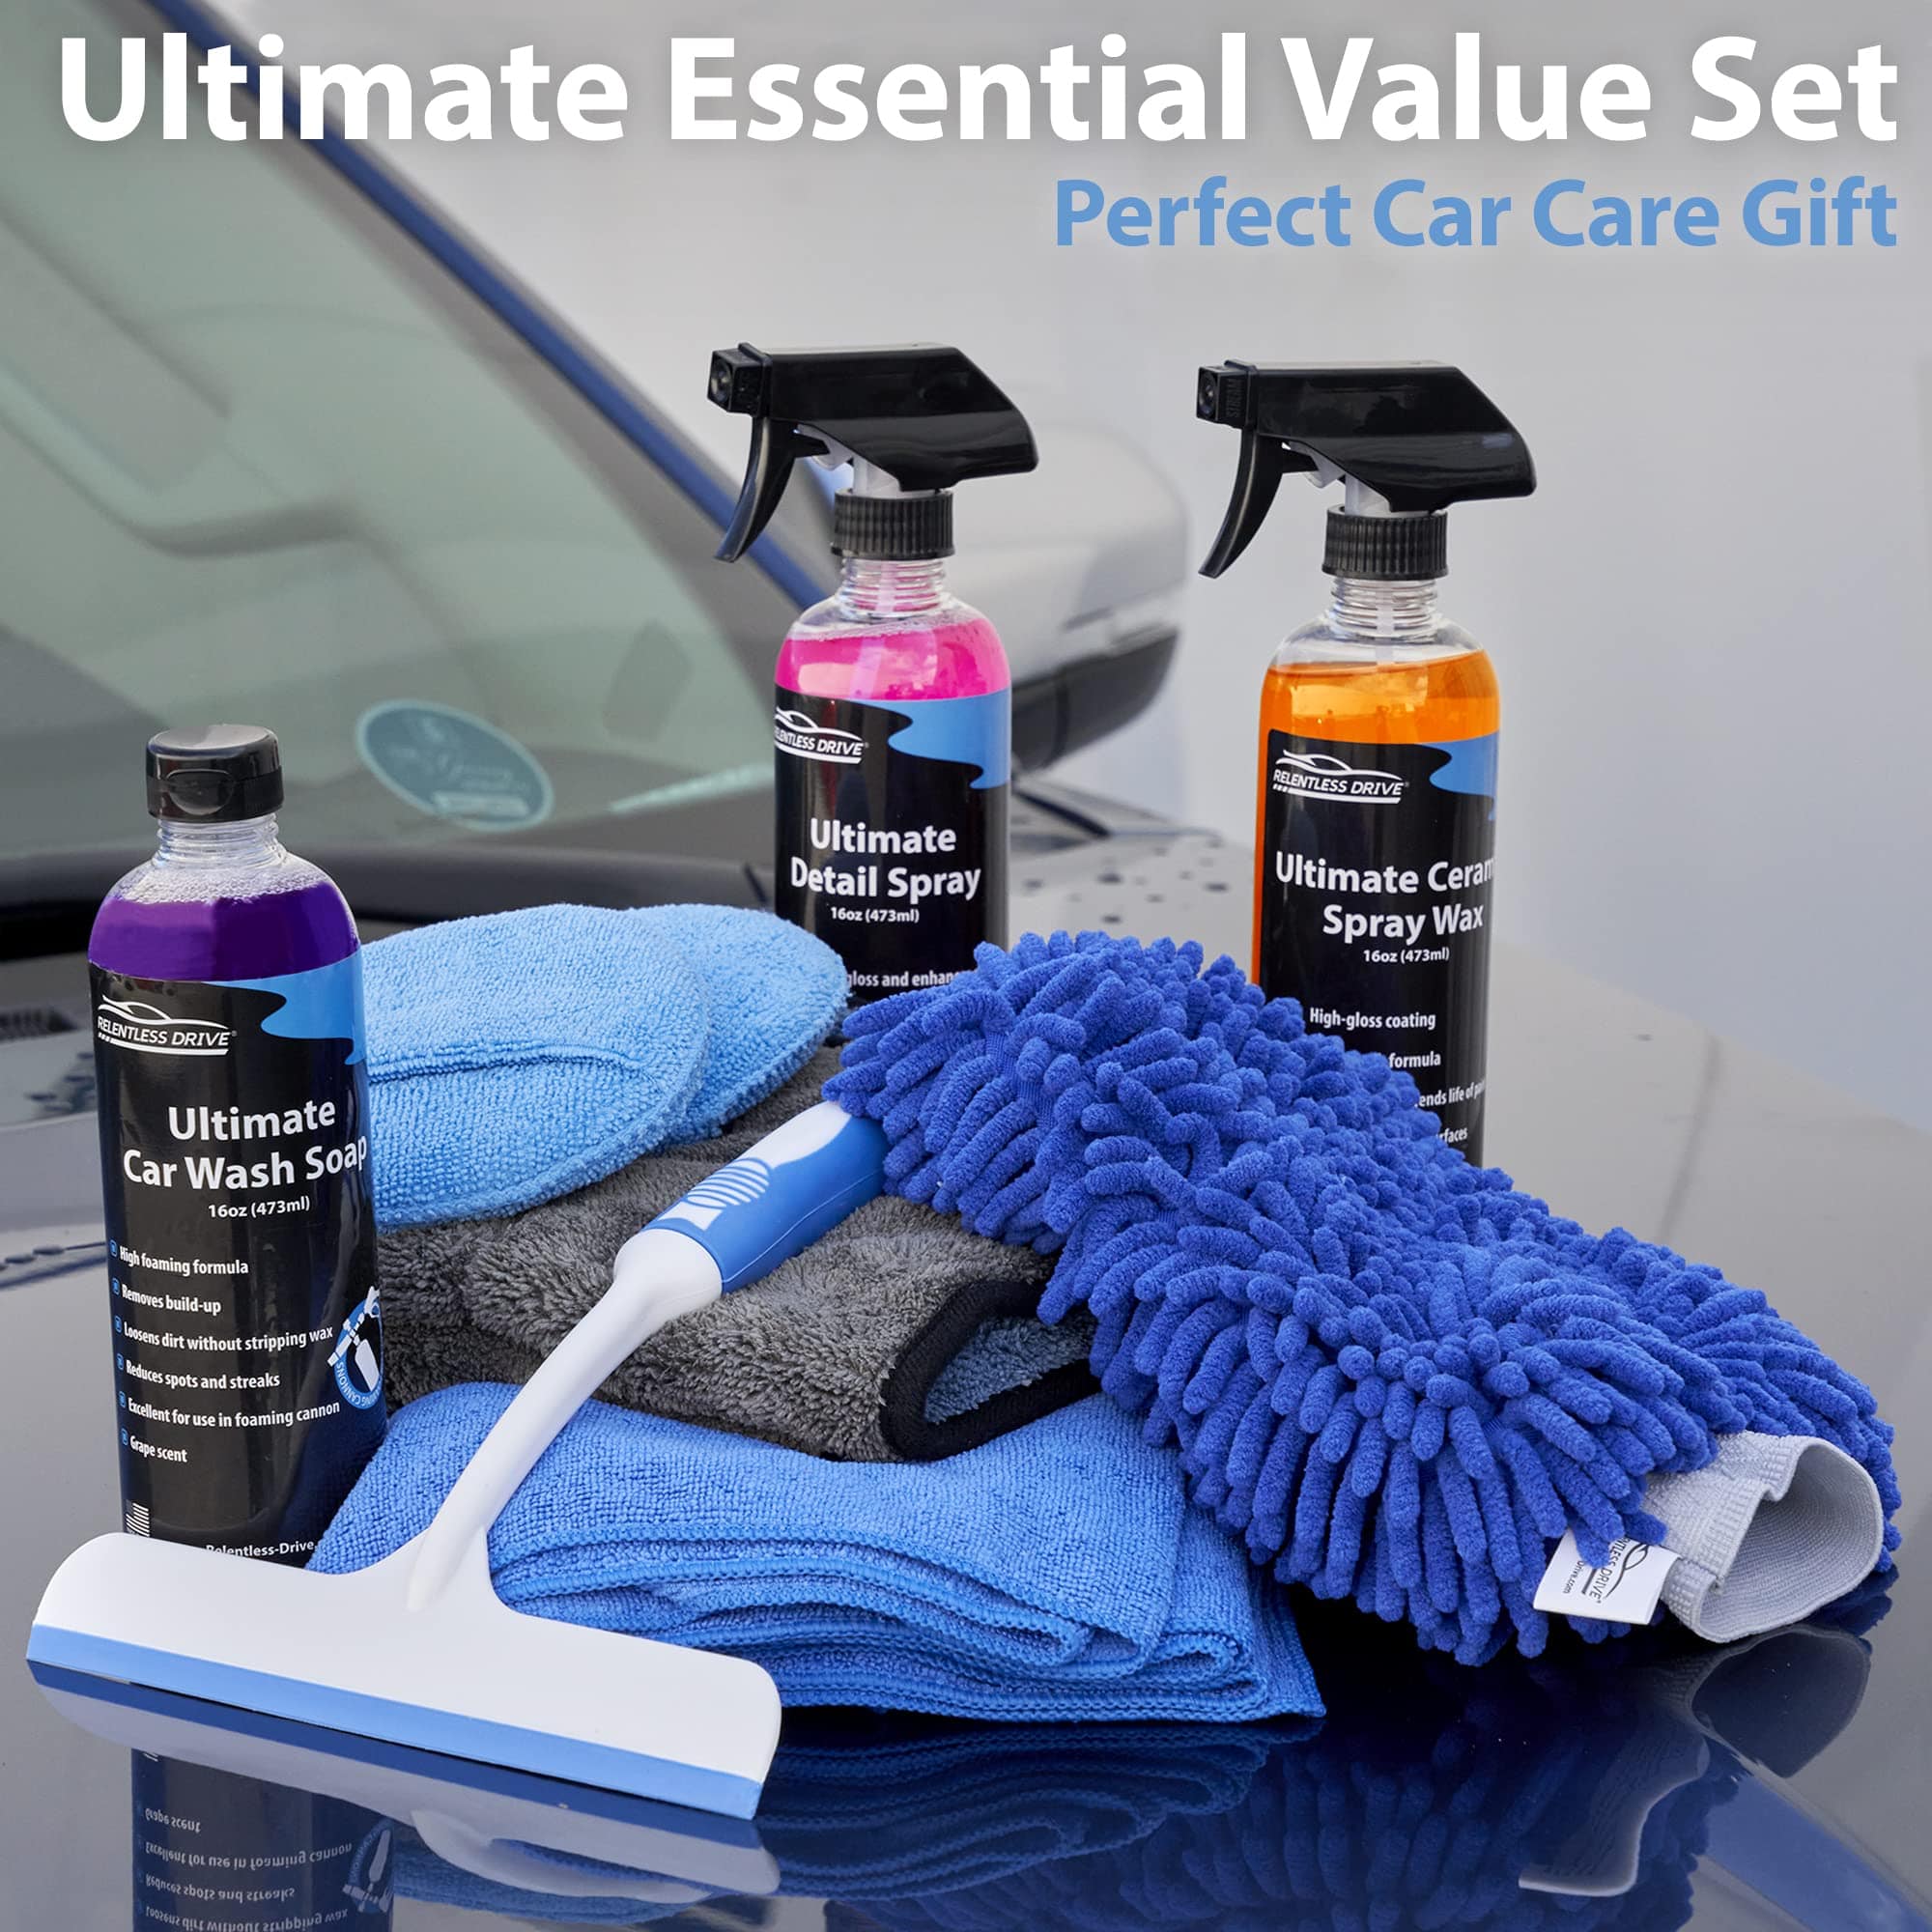 Relentless Drive 16-Piece Car Wash Kit with Car Wash Soap & Car